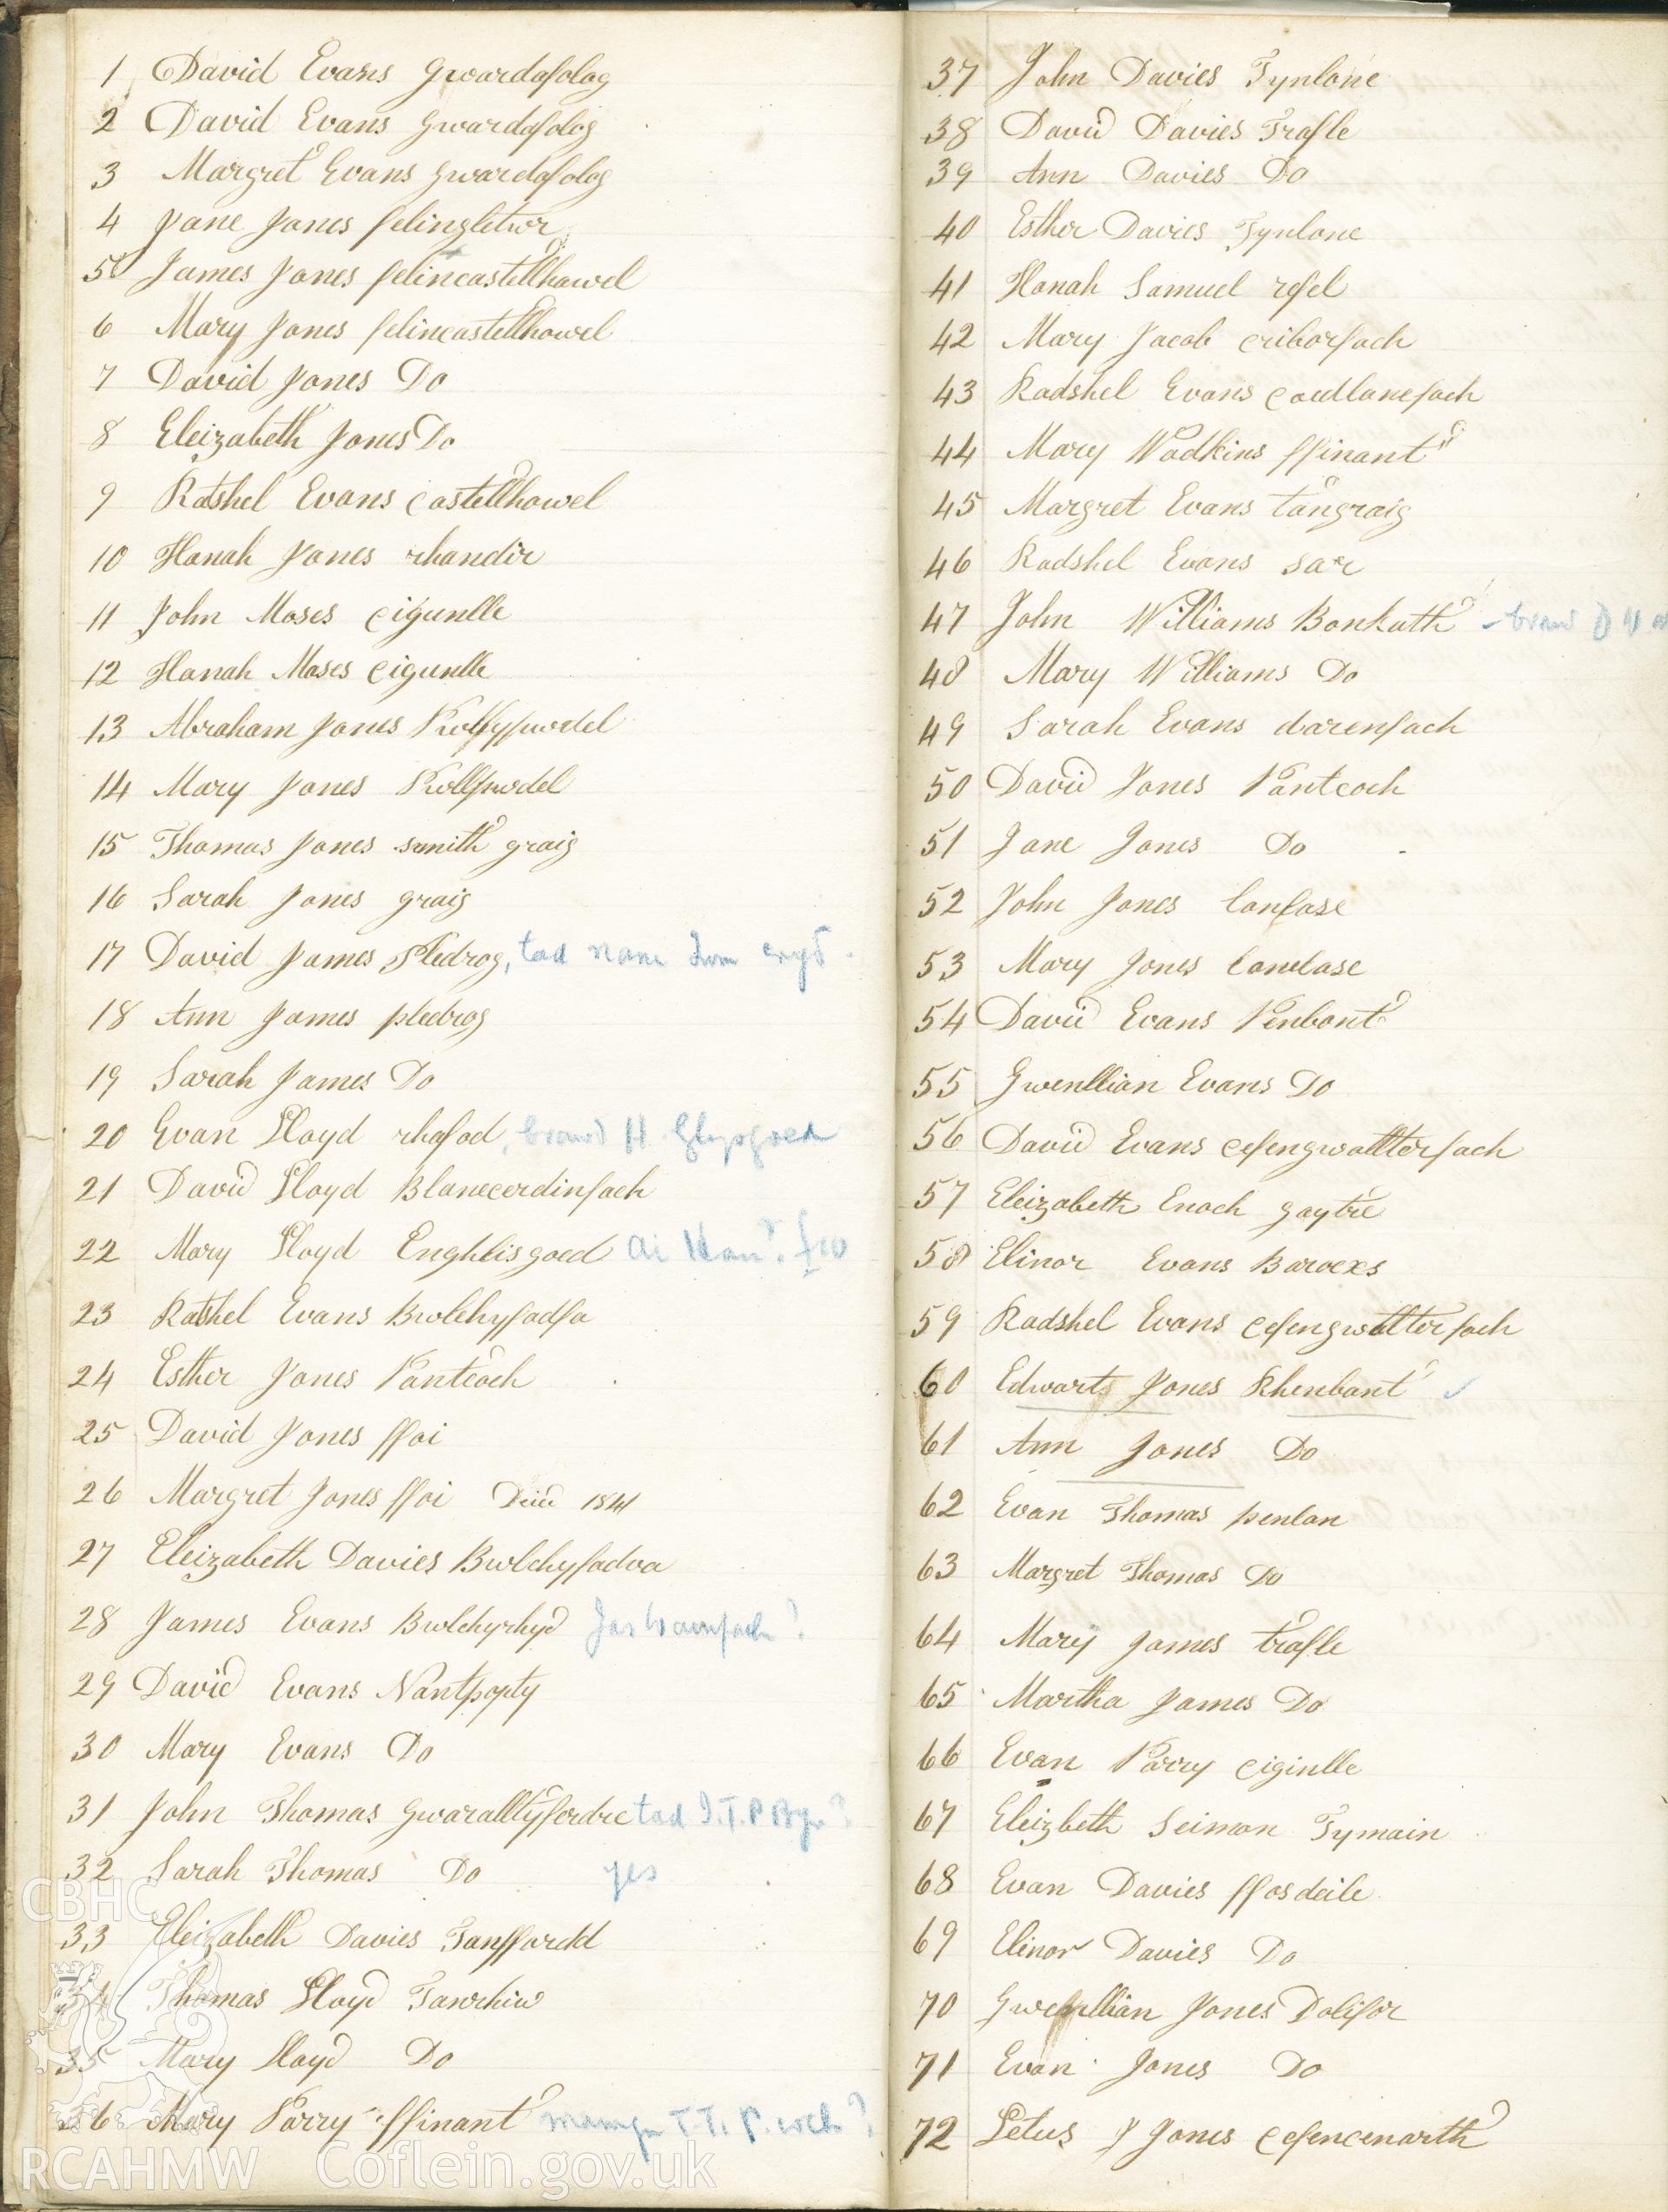 Page from handwritten Subscriber's book for yr Hen Gapel, Rhydowen. Names on this double page begin with 1. David Evans Gwardafolog and end with 72. Letus Jones Cefncenarth. Donated to the RCAHMW as part of the Digital Dissent Project.